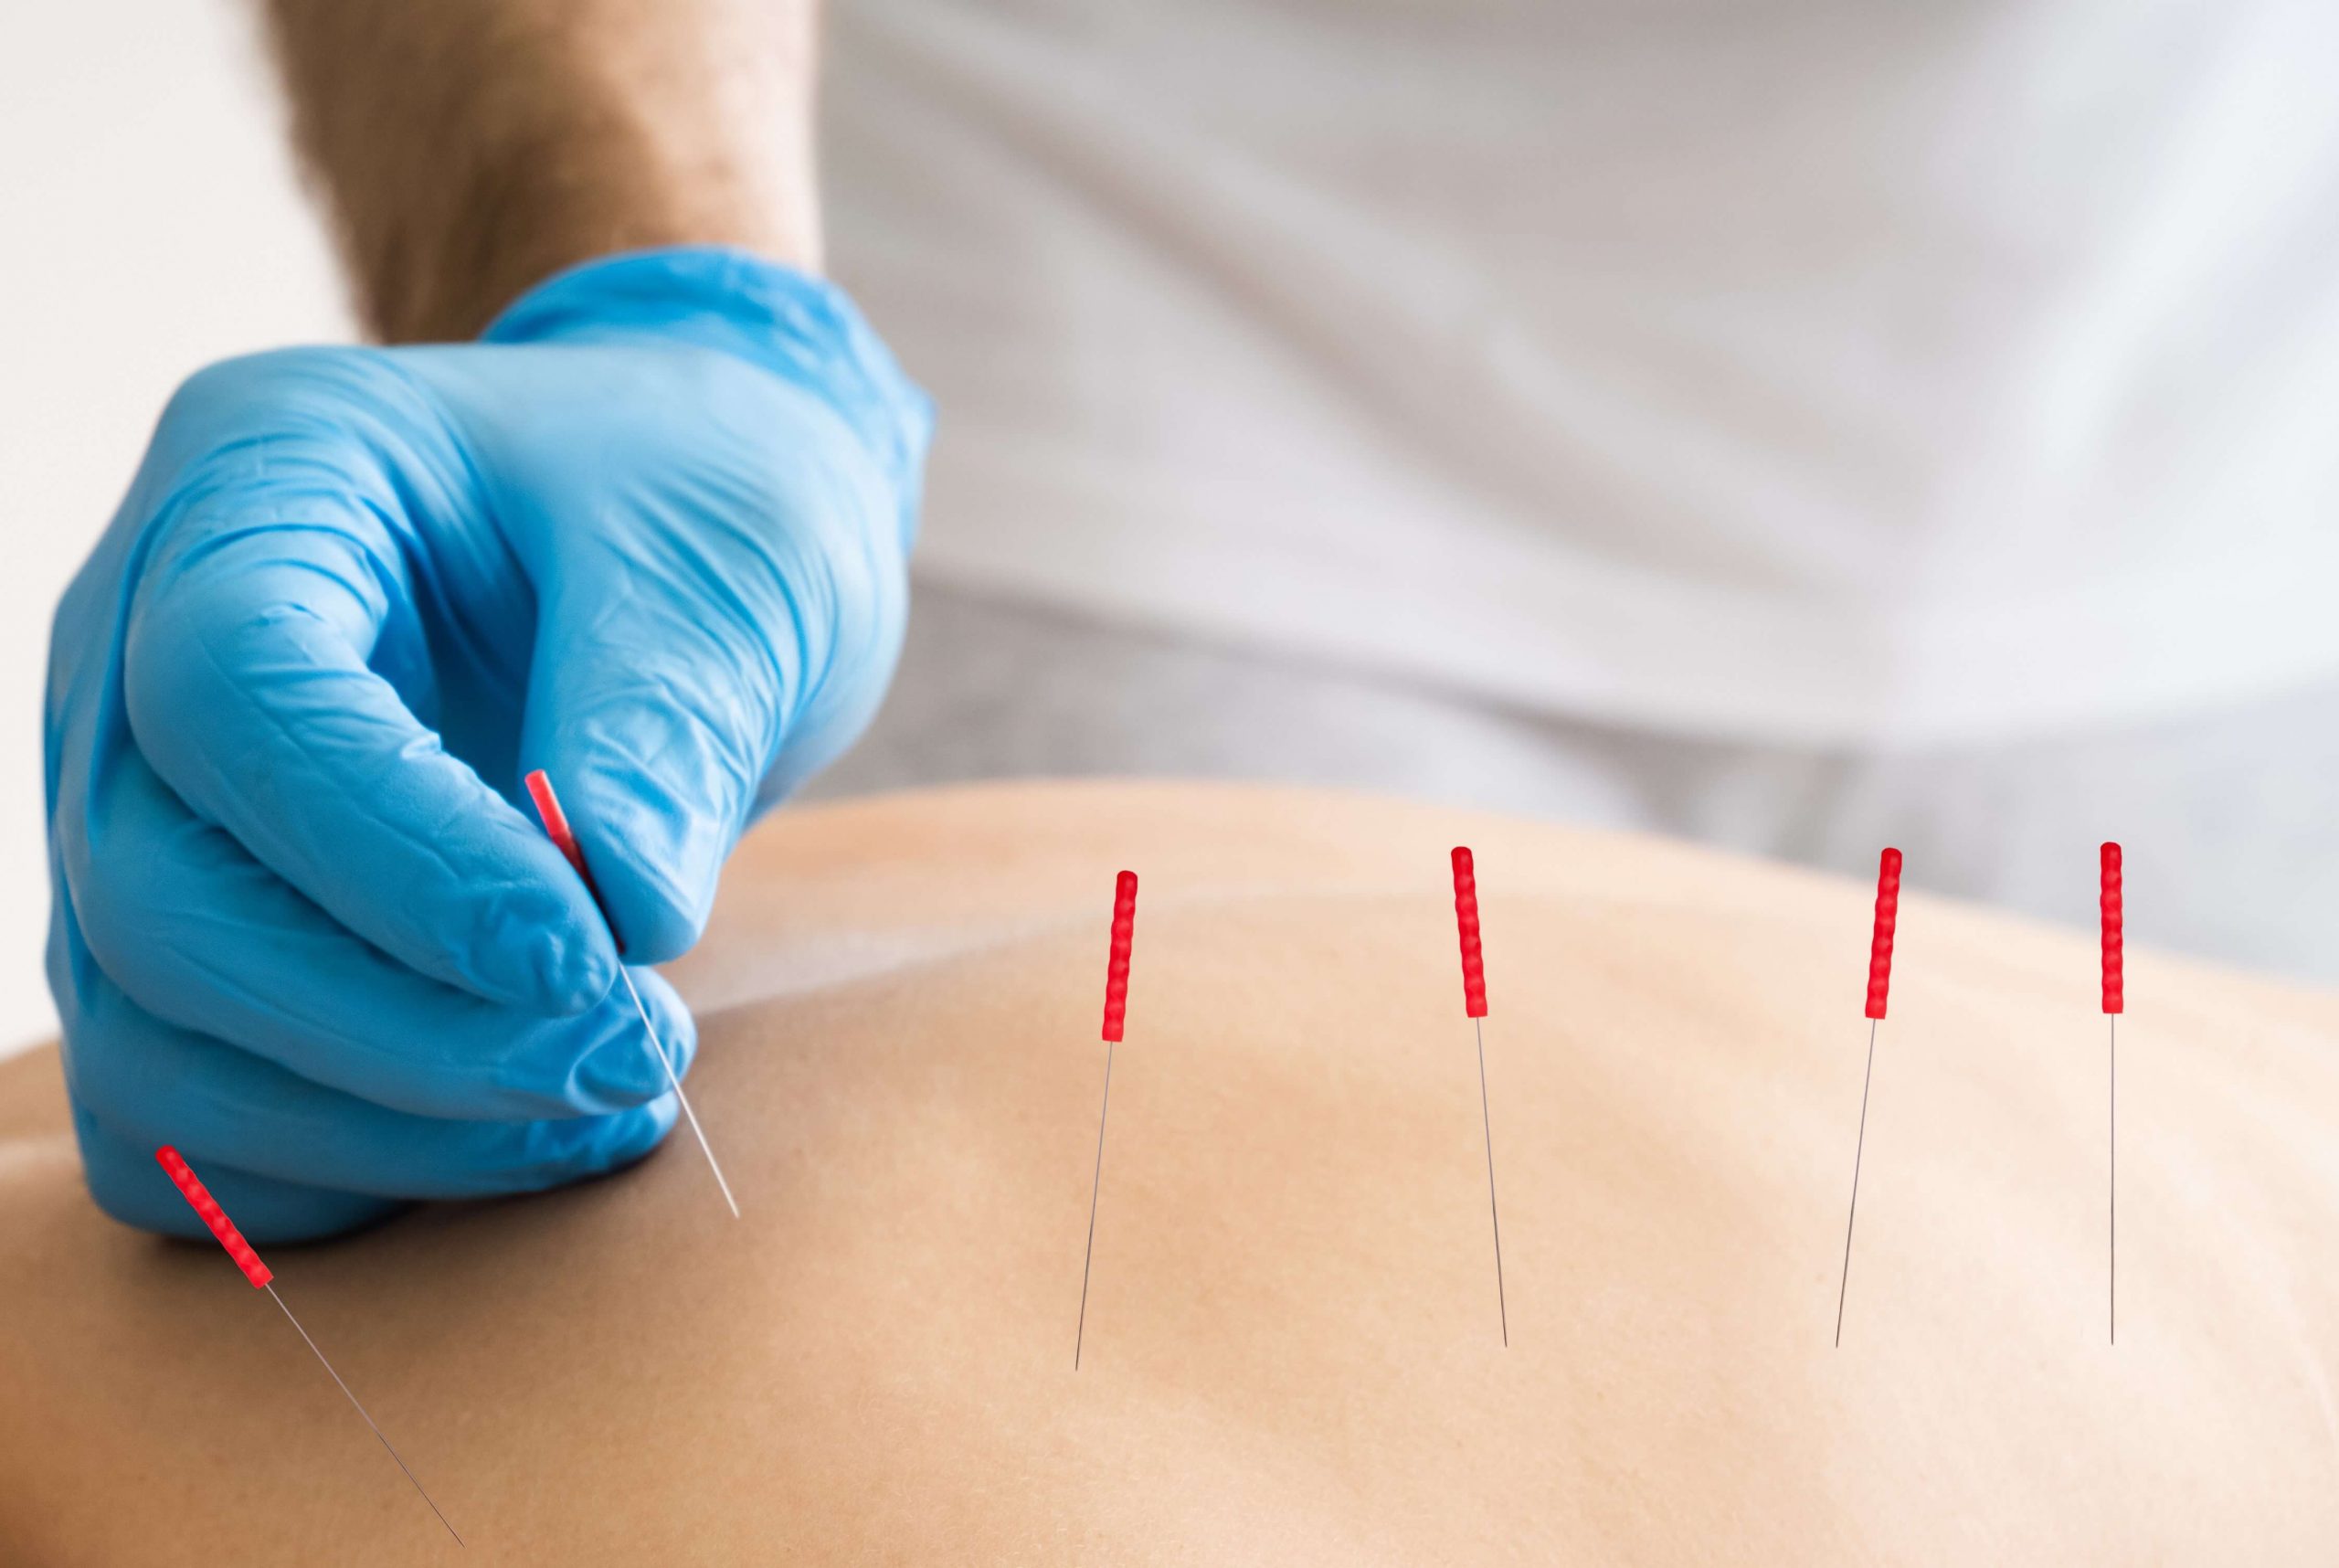 Acupuncture treatment with needles on patient's back.